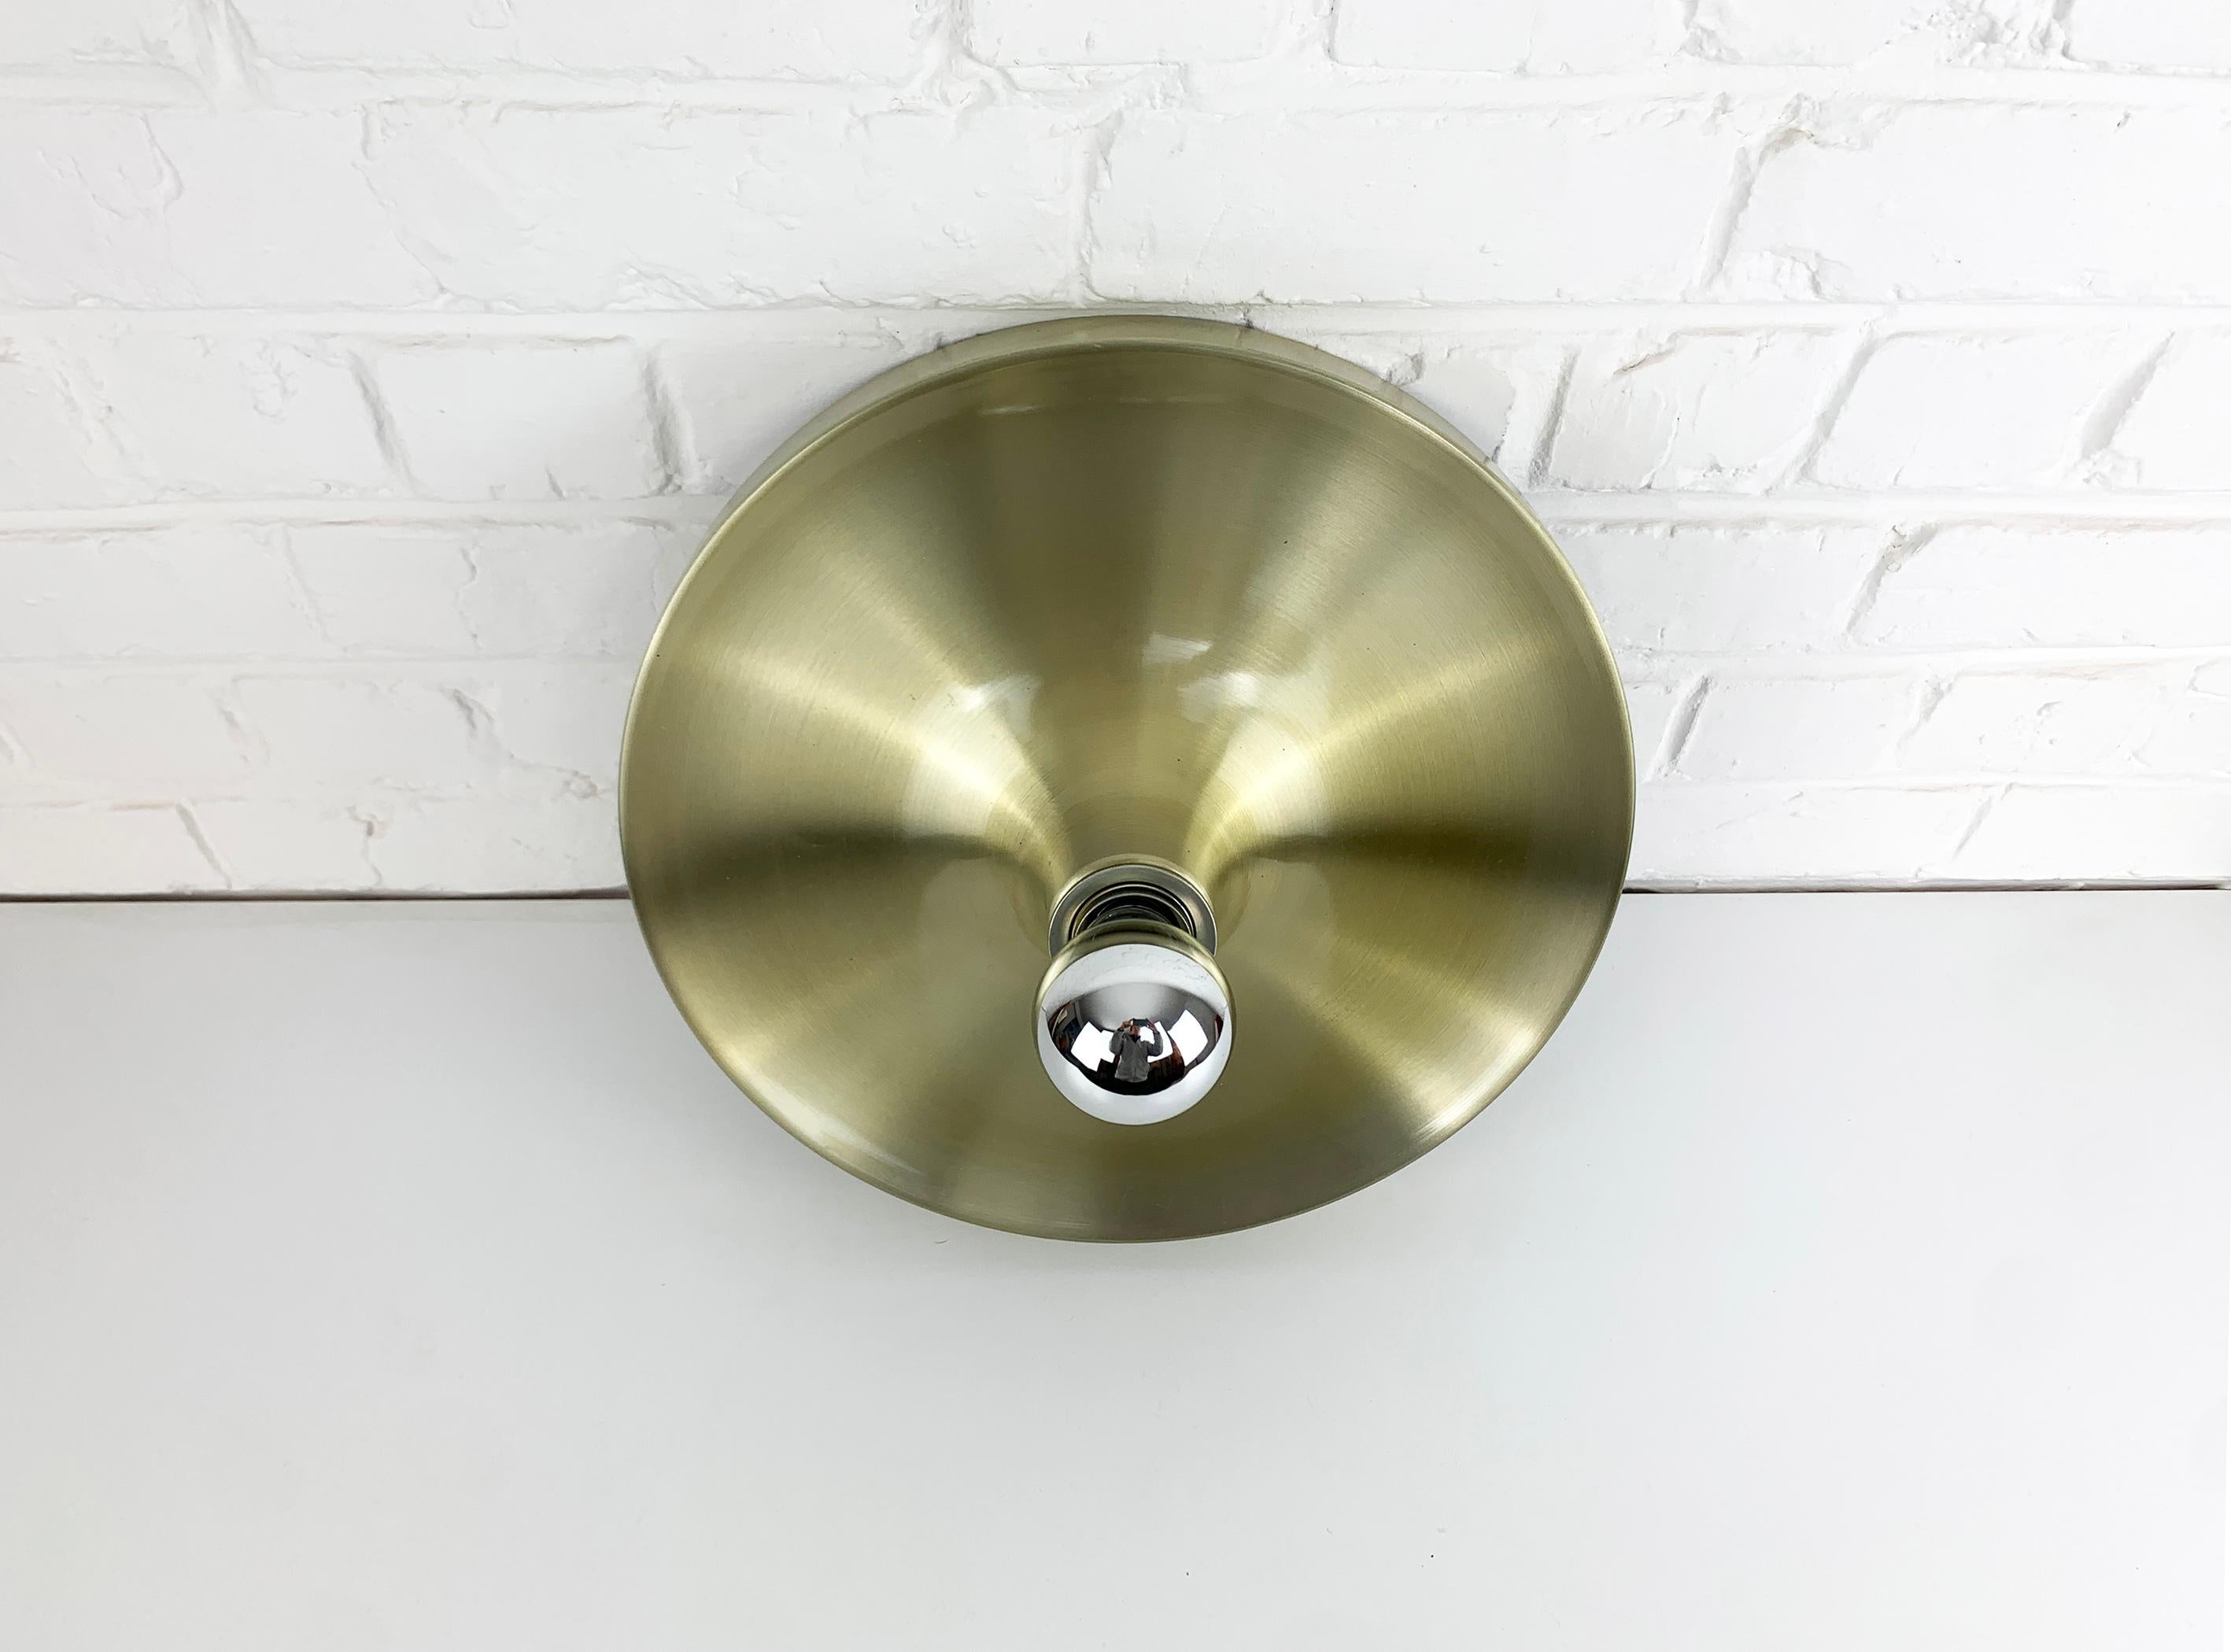 Aluminum Charlotte Perriand Flush Sconce Gold Disc Wall Light, Germany, 1960s For Sale